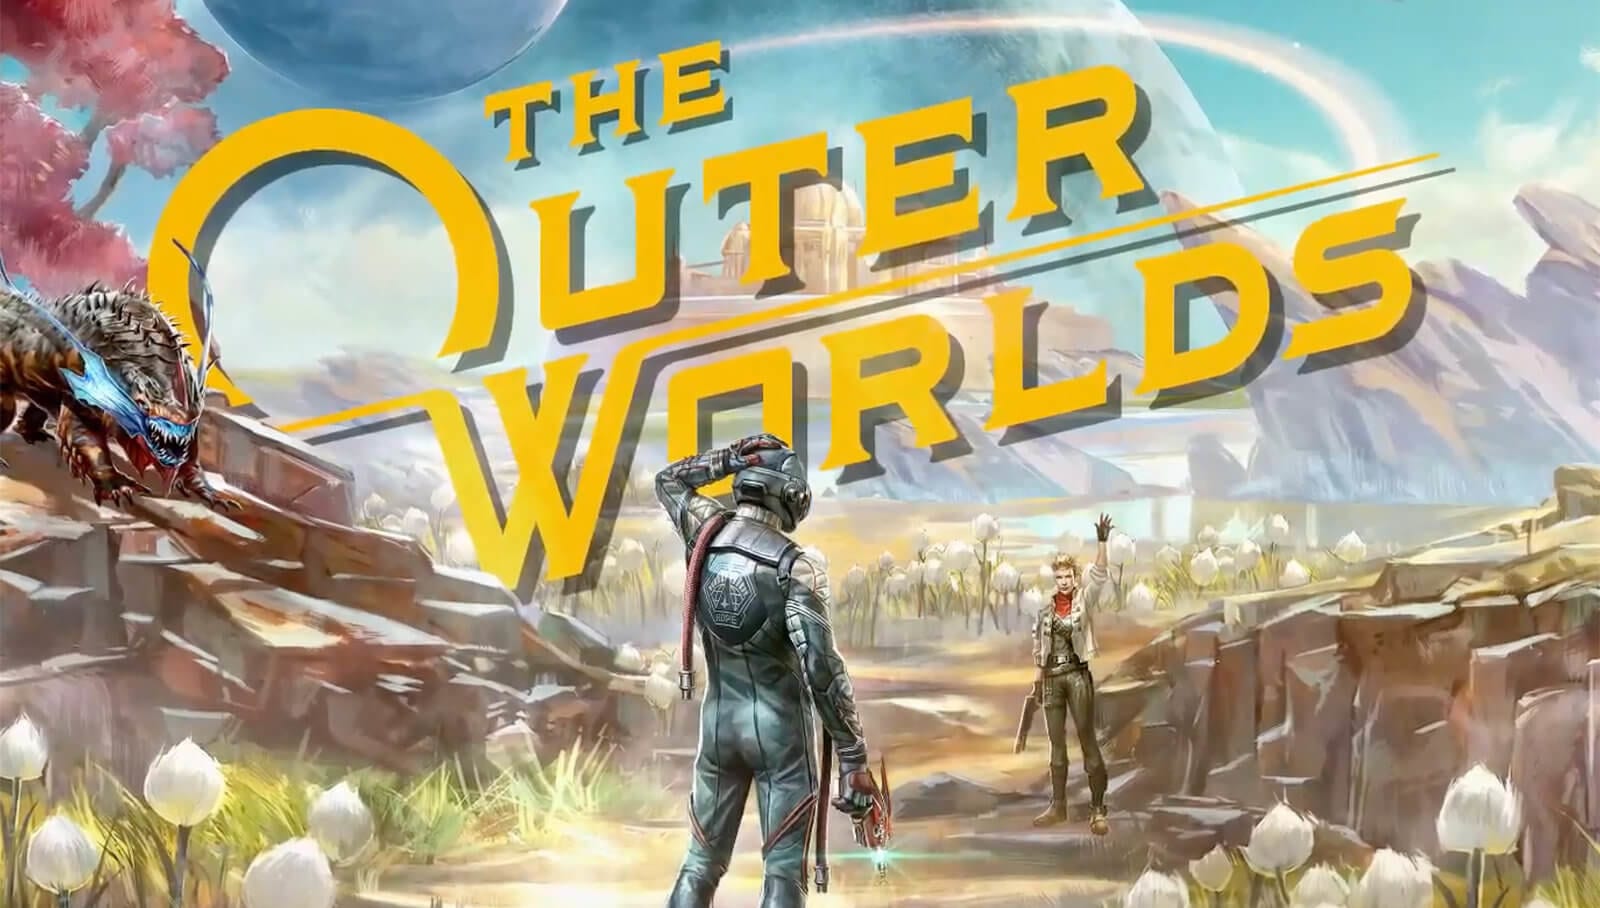 Outer Worlds launch trailer